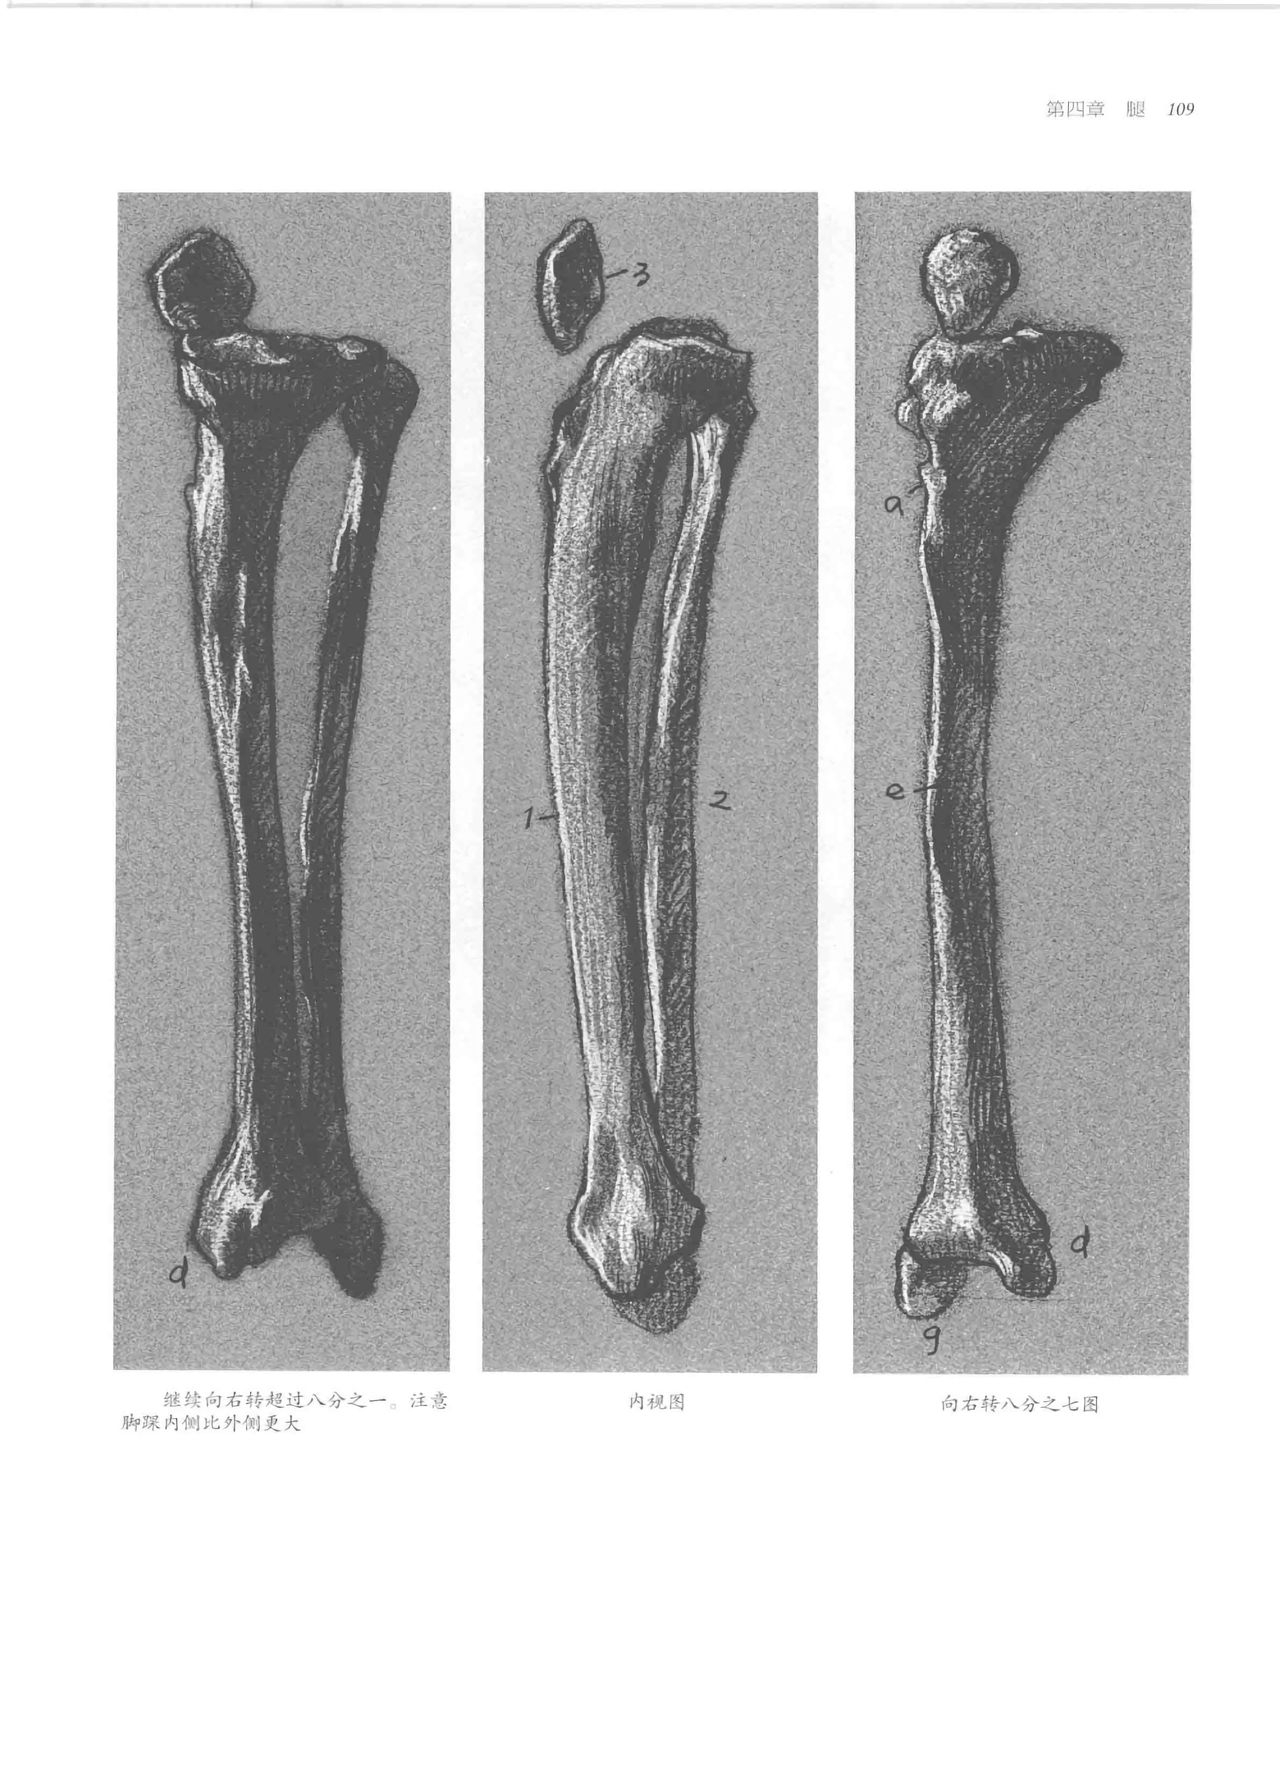 Anatomy-A Complete Guide for Artists - Joseph Sheppard [Chinese] 109